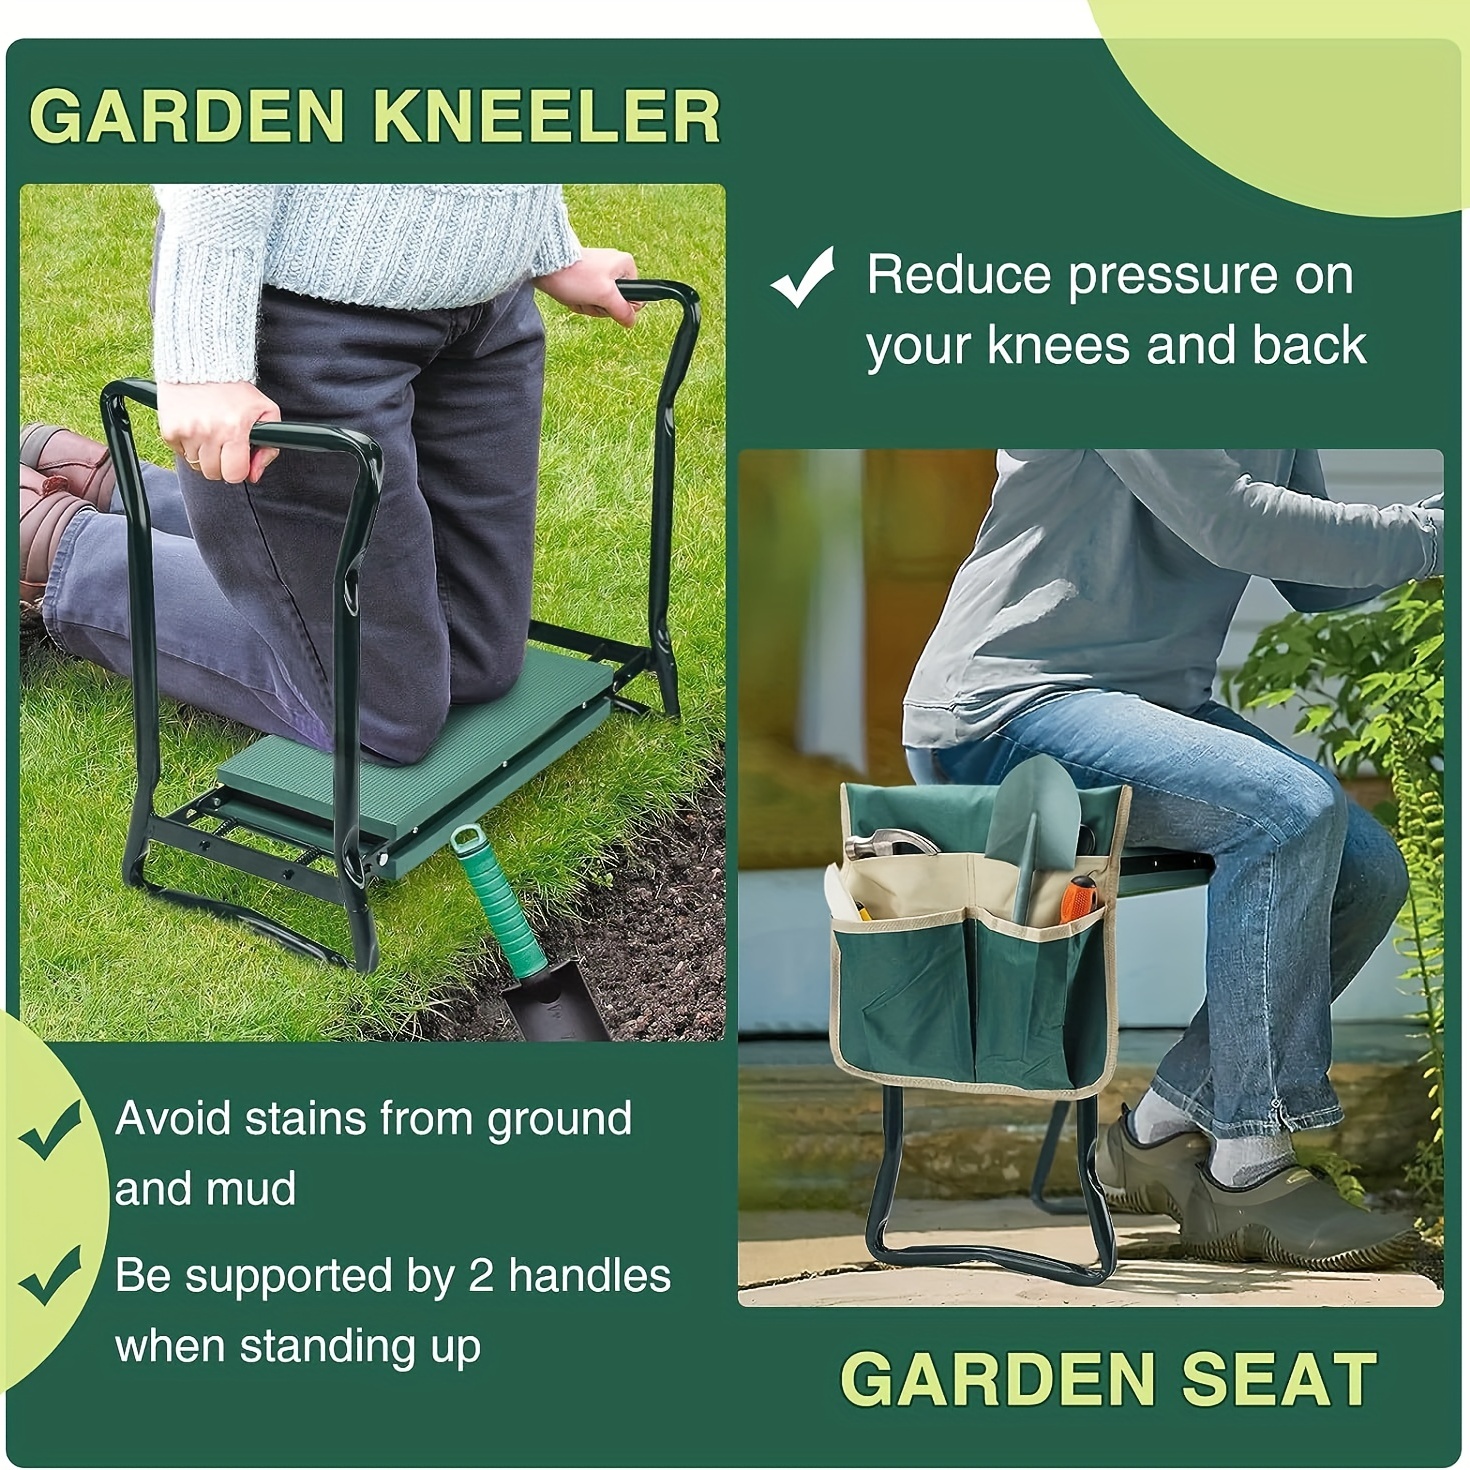 1pc garden kneeling pad and chair foldable garden bench heavy duty gardening bench used for kneeling and sitting to prevent knee and back pain excellent gardening gift for women grandparents elderly mom and dad 6